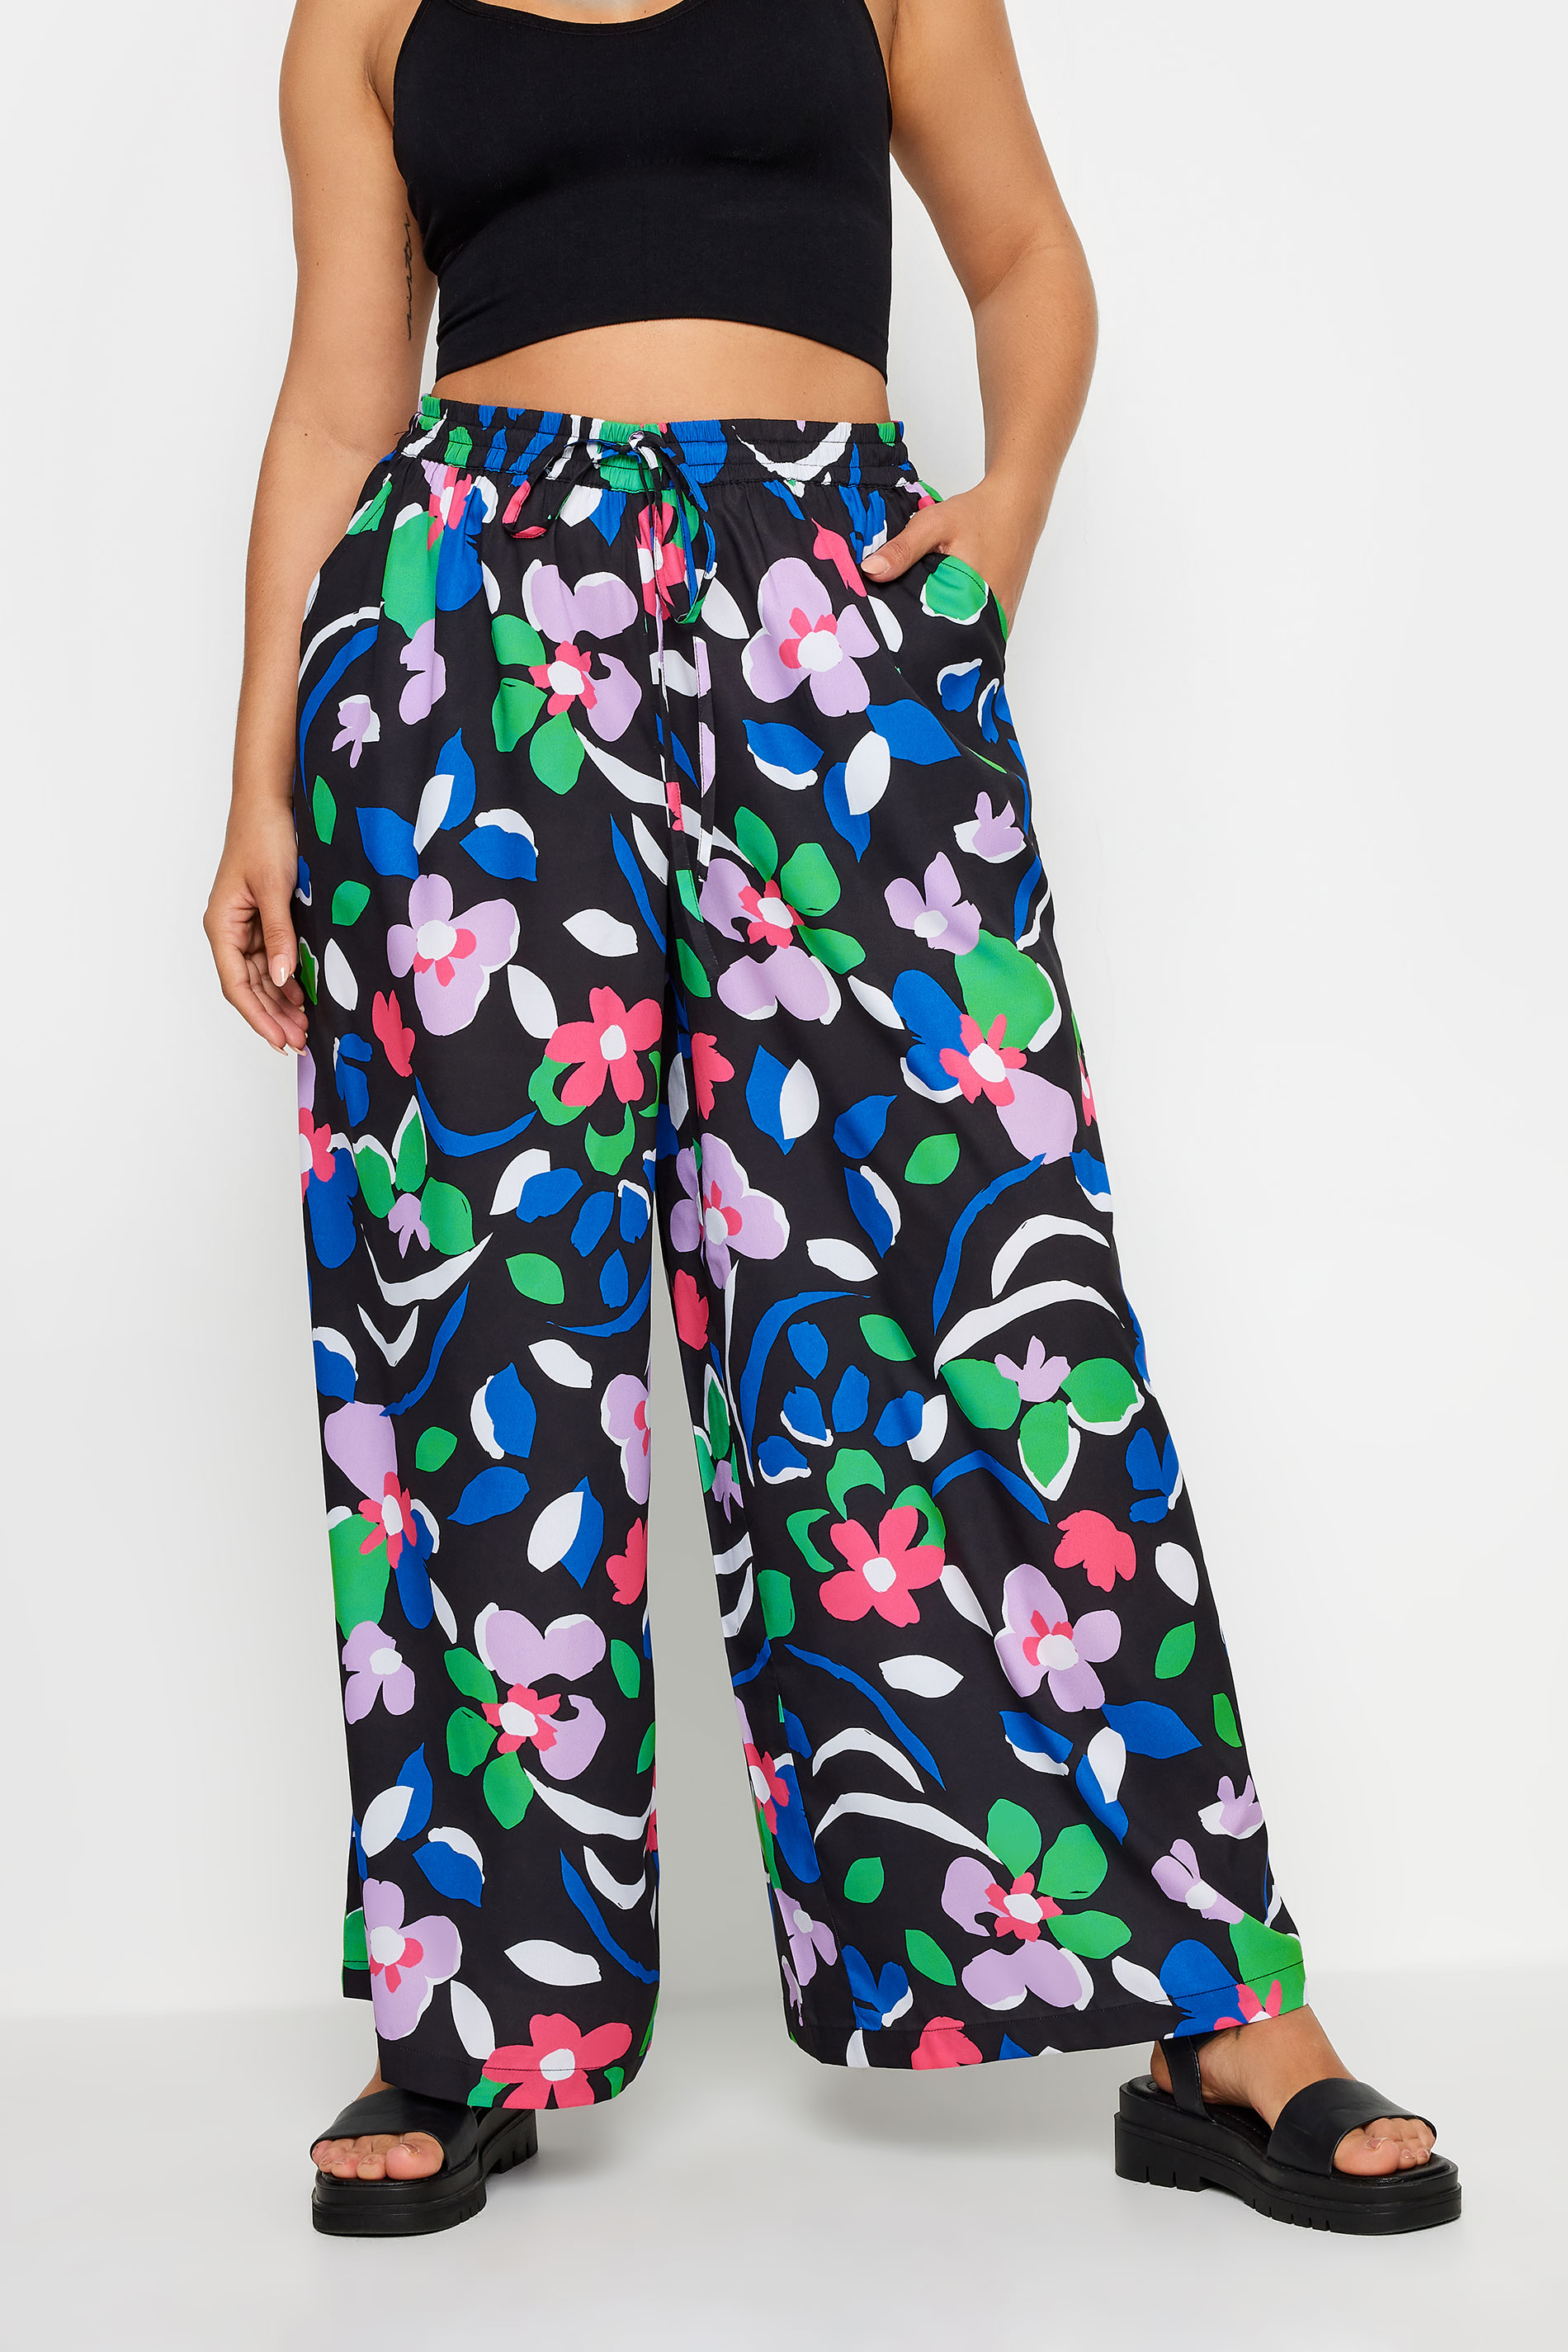 LIMITED COLLECTION Plus Size Black Floral Print Drawstring Wide Leg Trousers | Yours Clothing 1